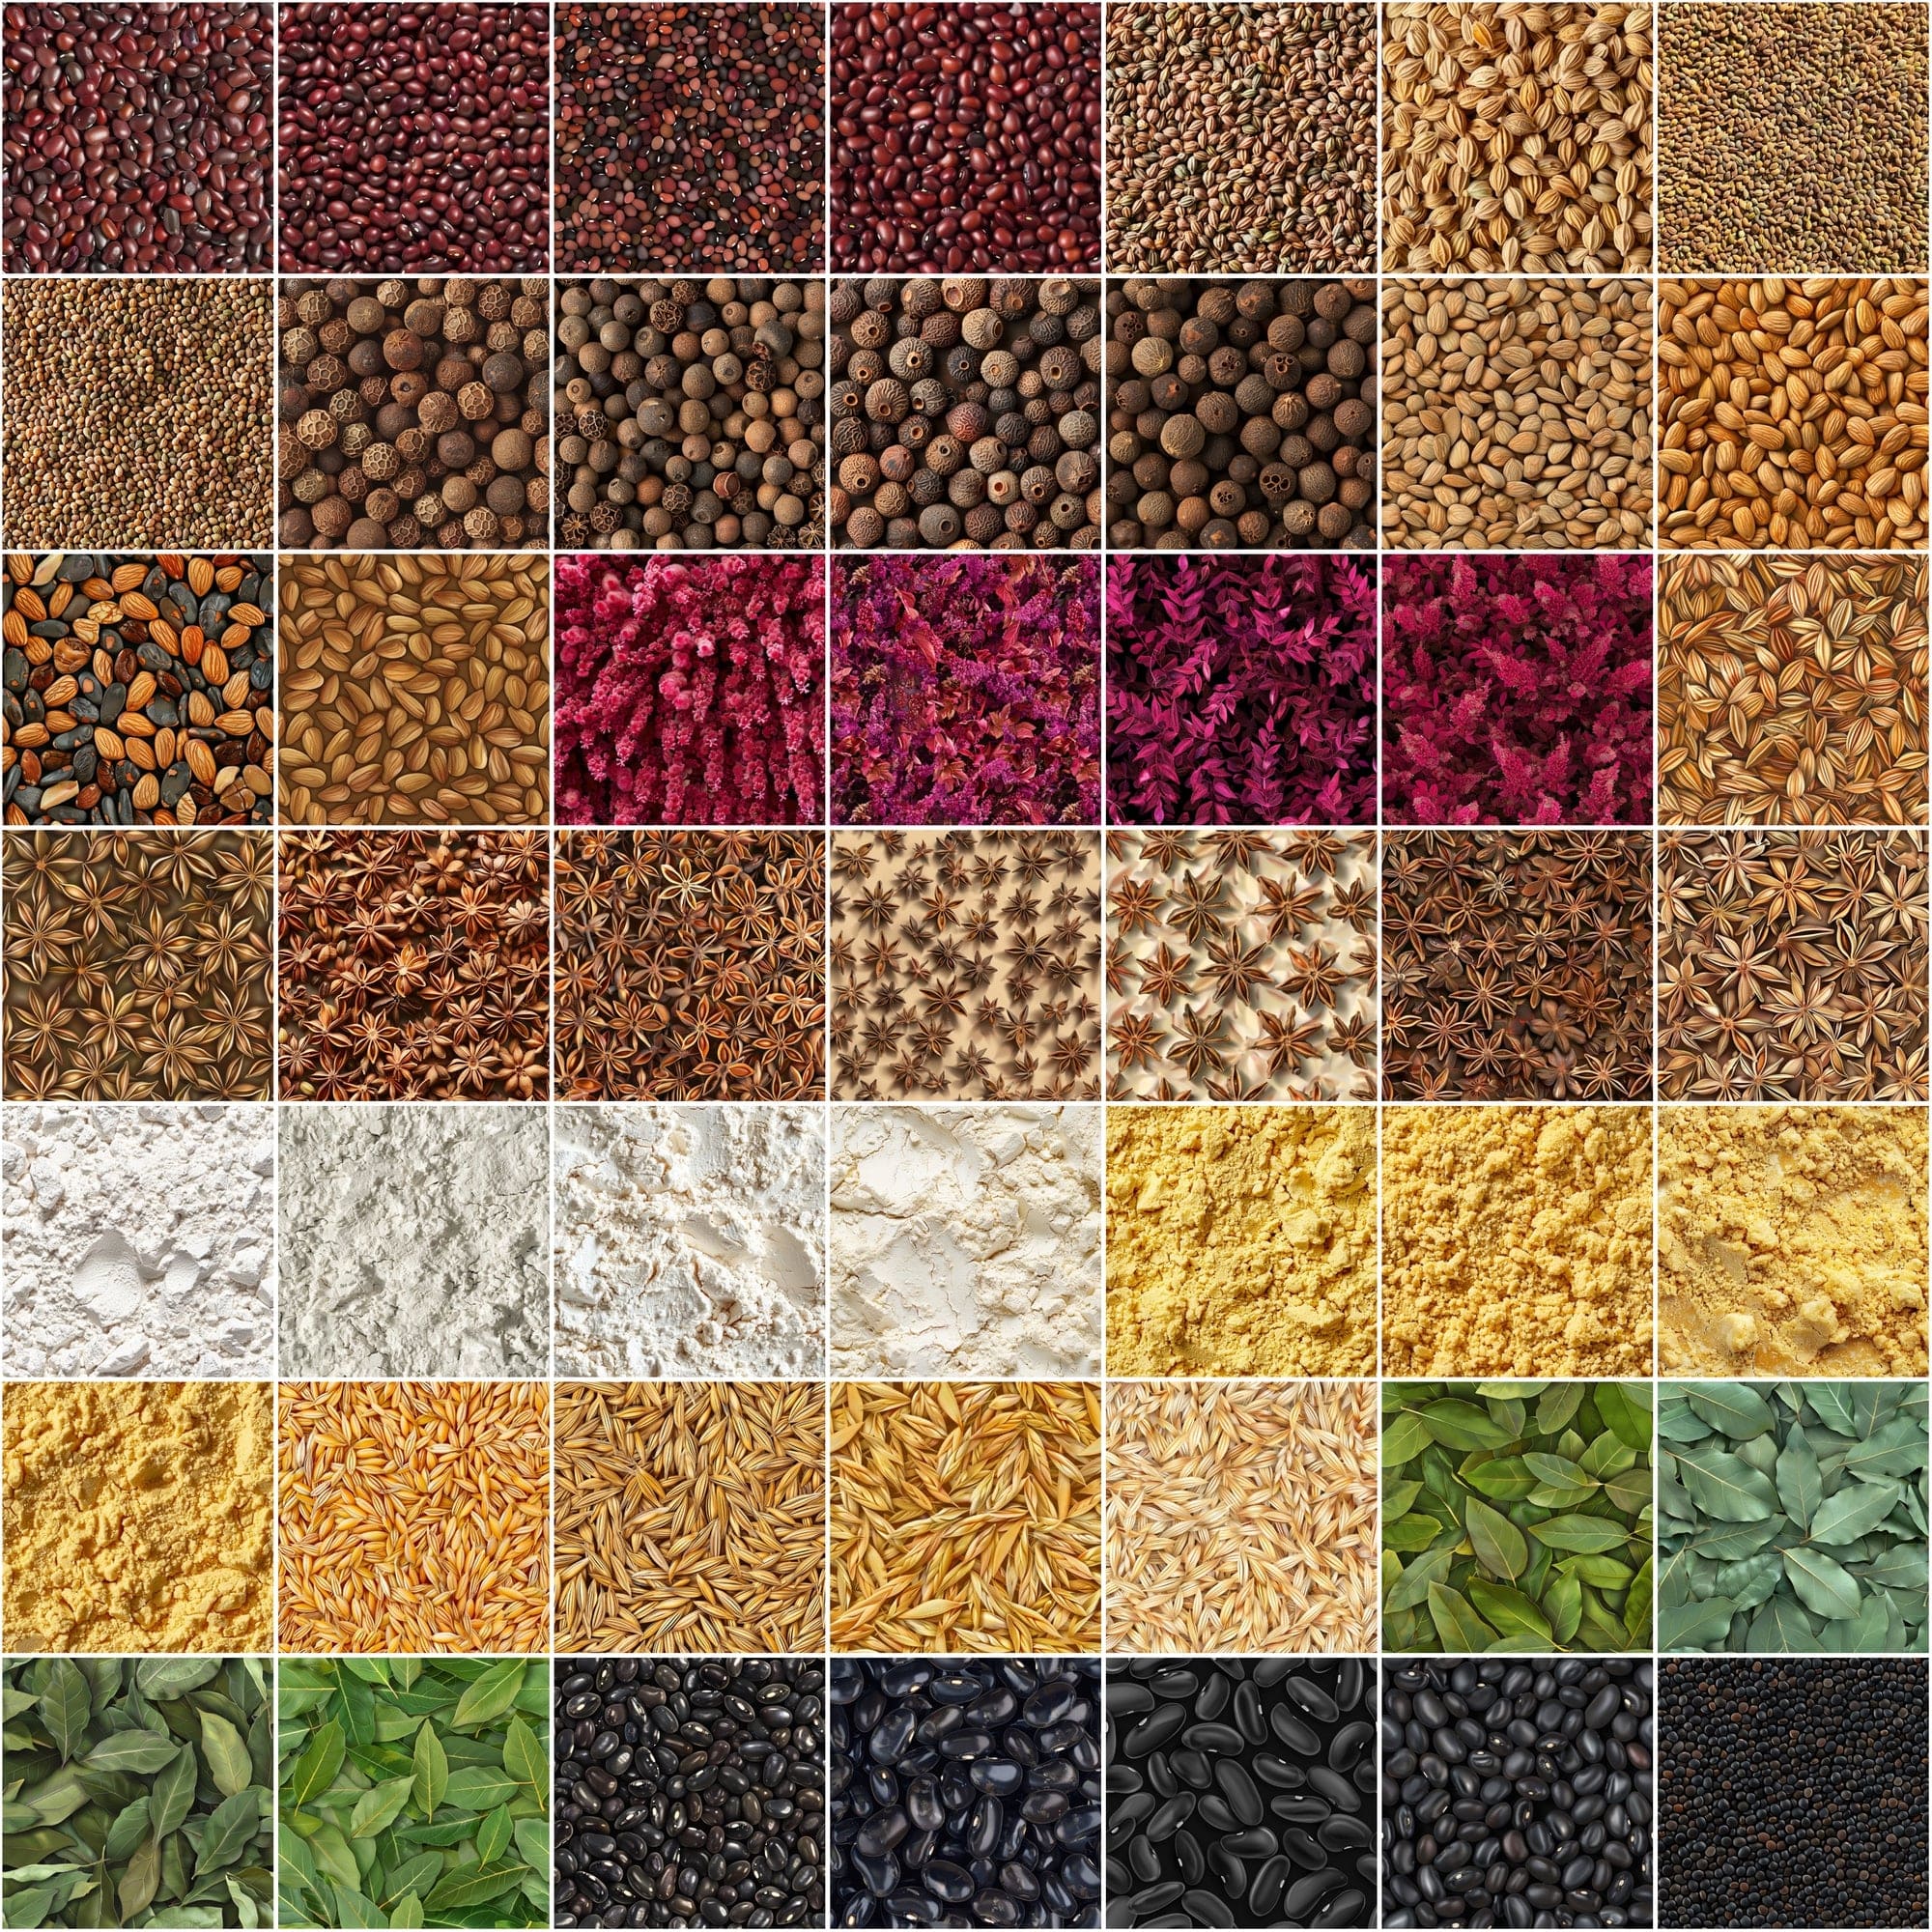 660 Seamless Spice & Seed Backgrounds with Photoshop Patterns Digital Download Sumobundle